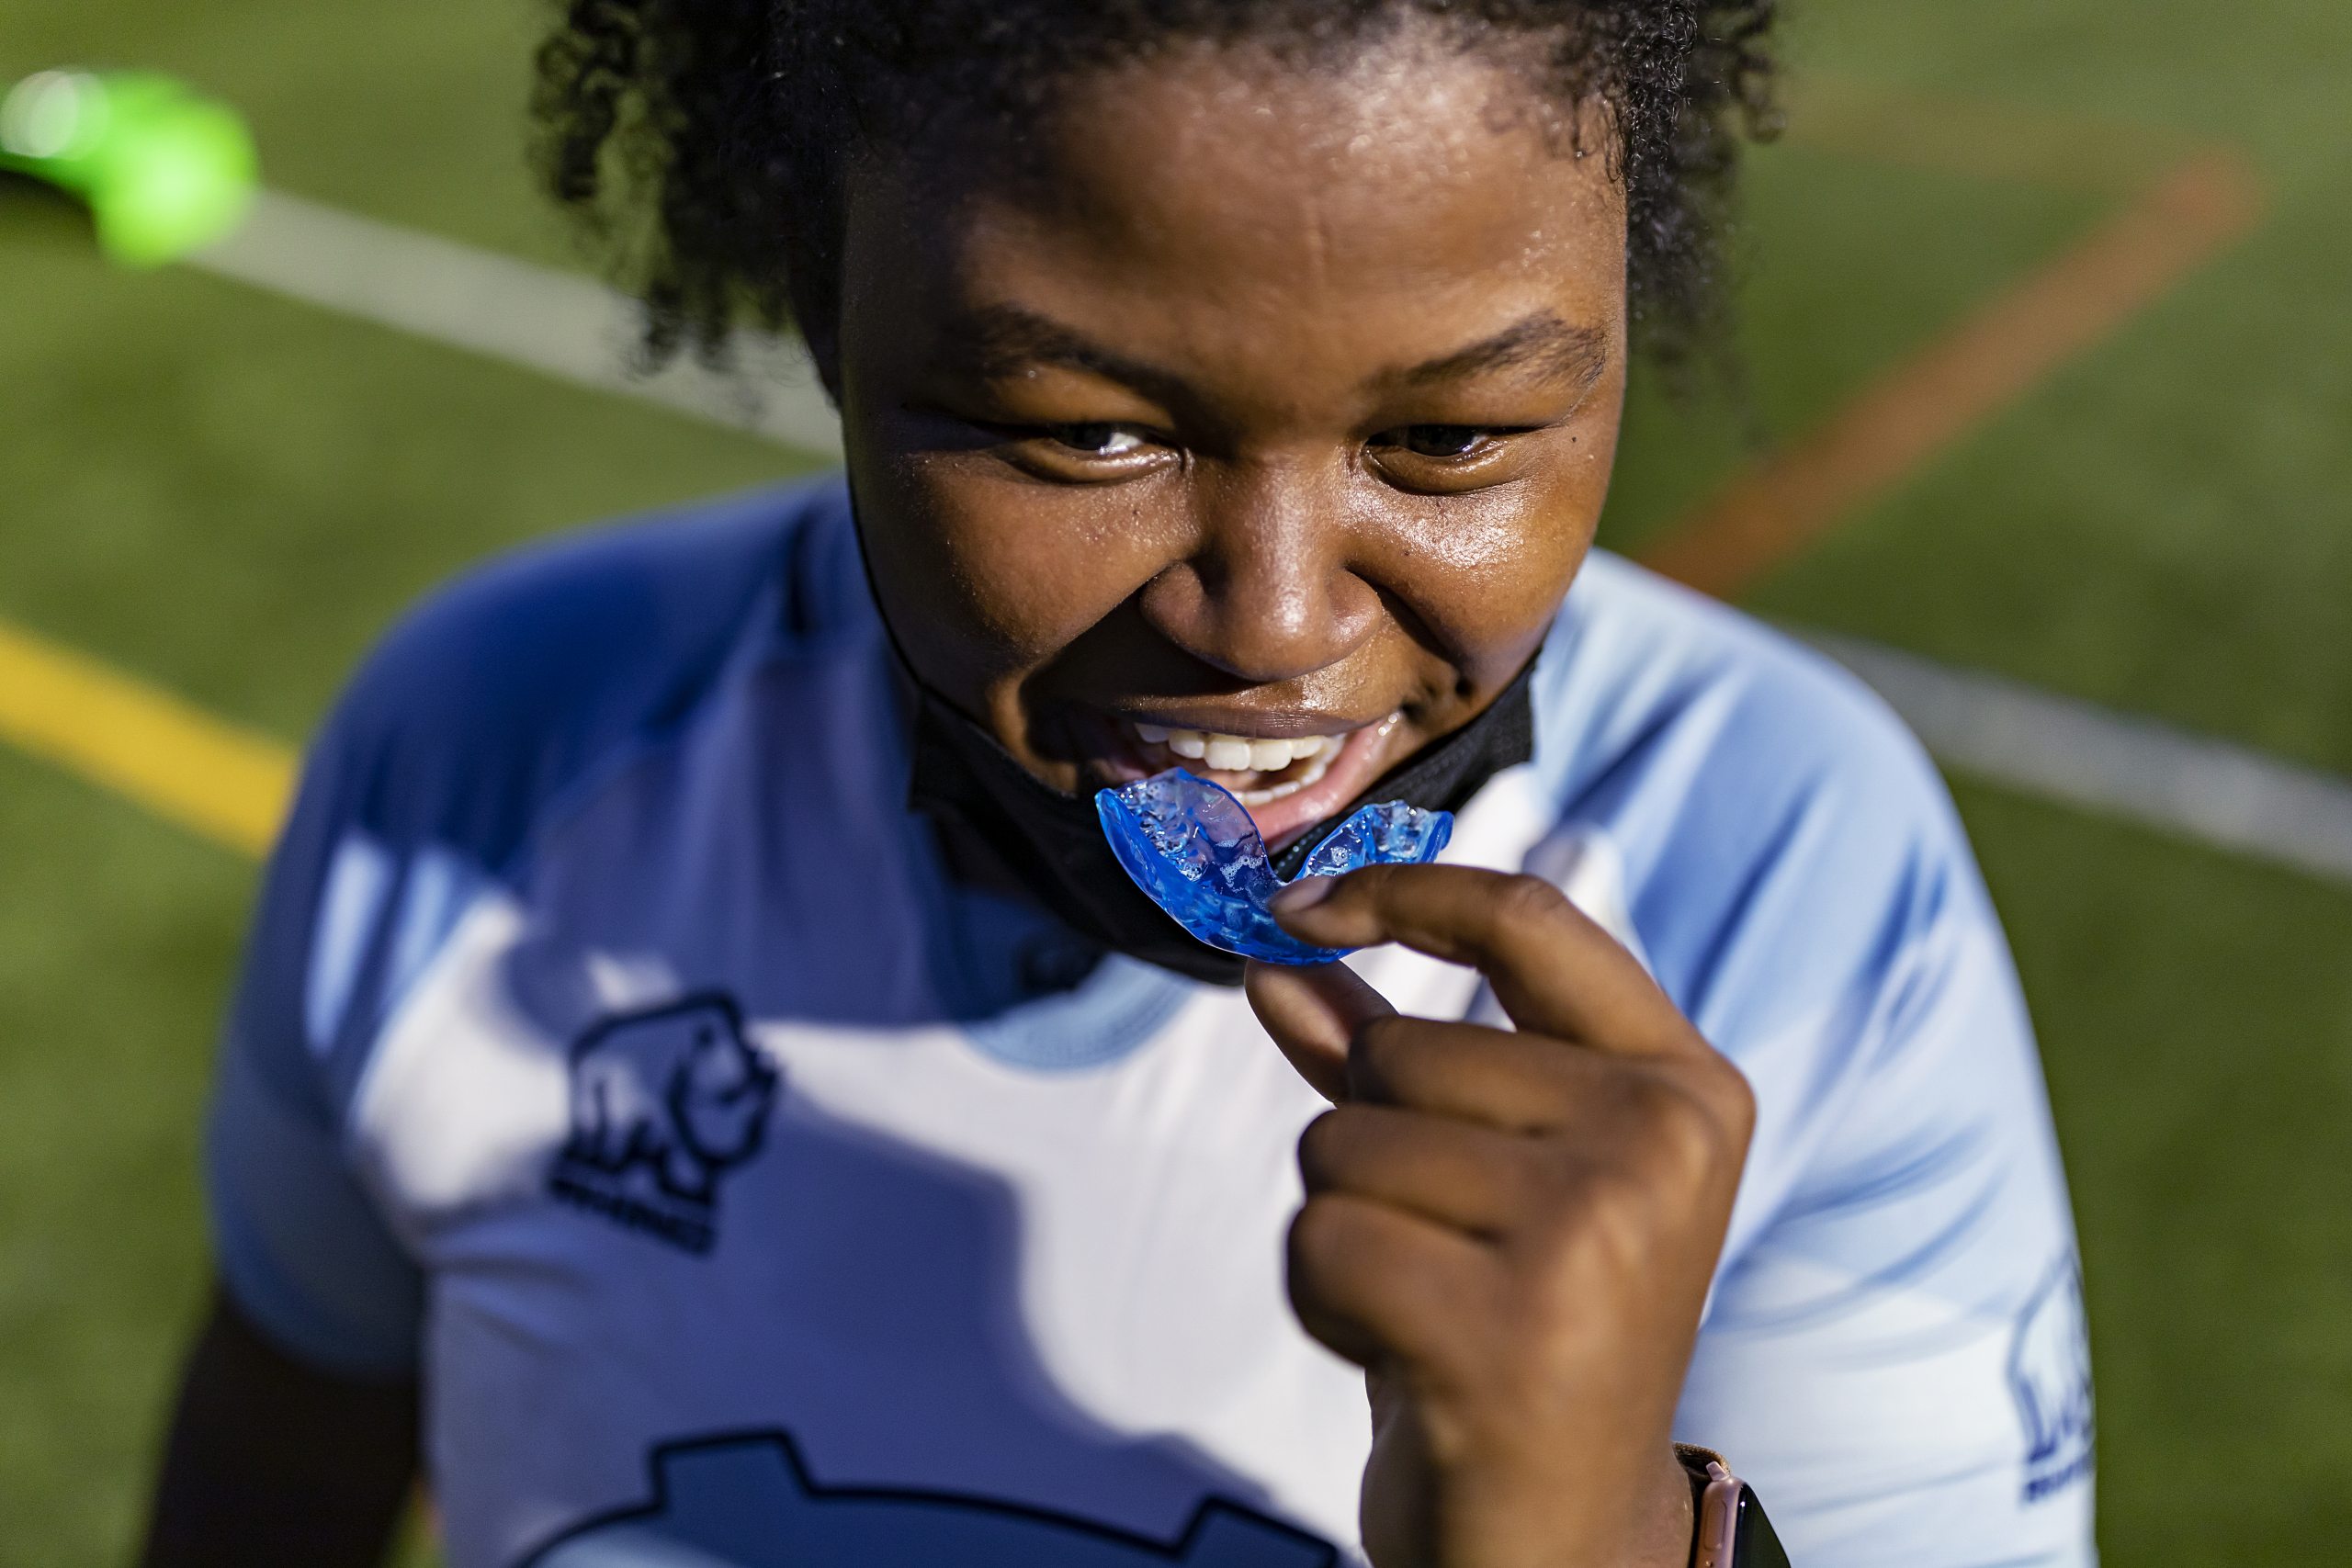 A player puts a mouth guard in her mouth.